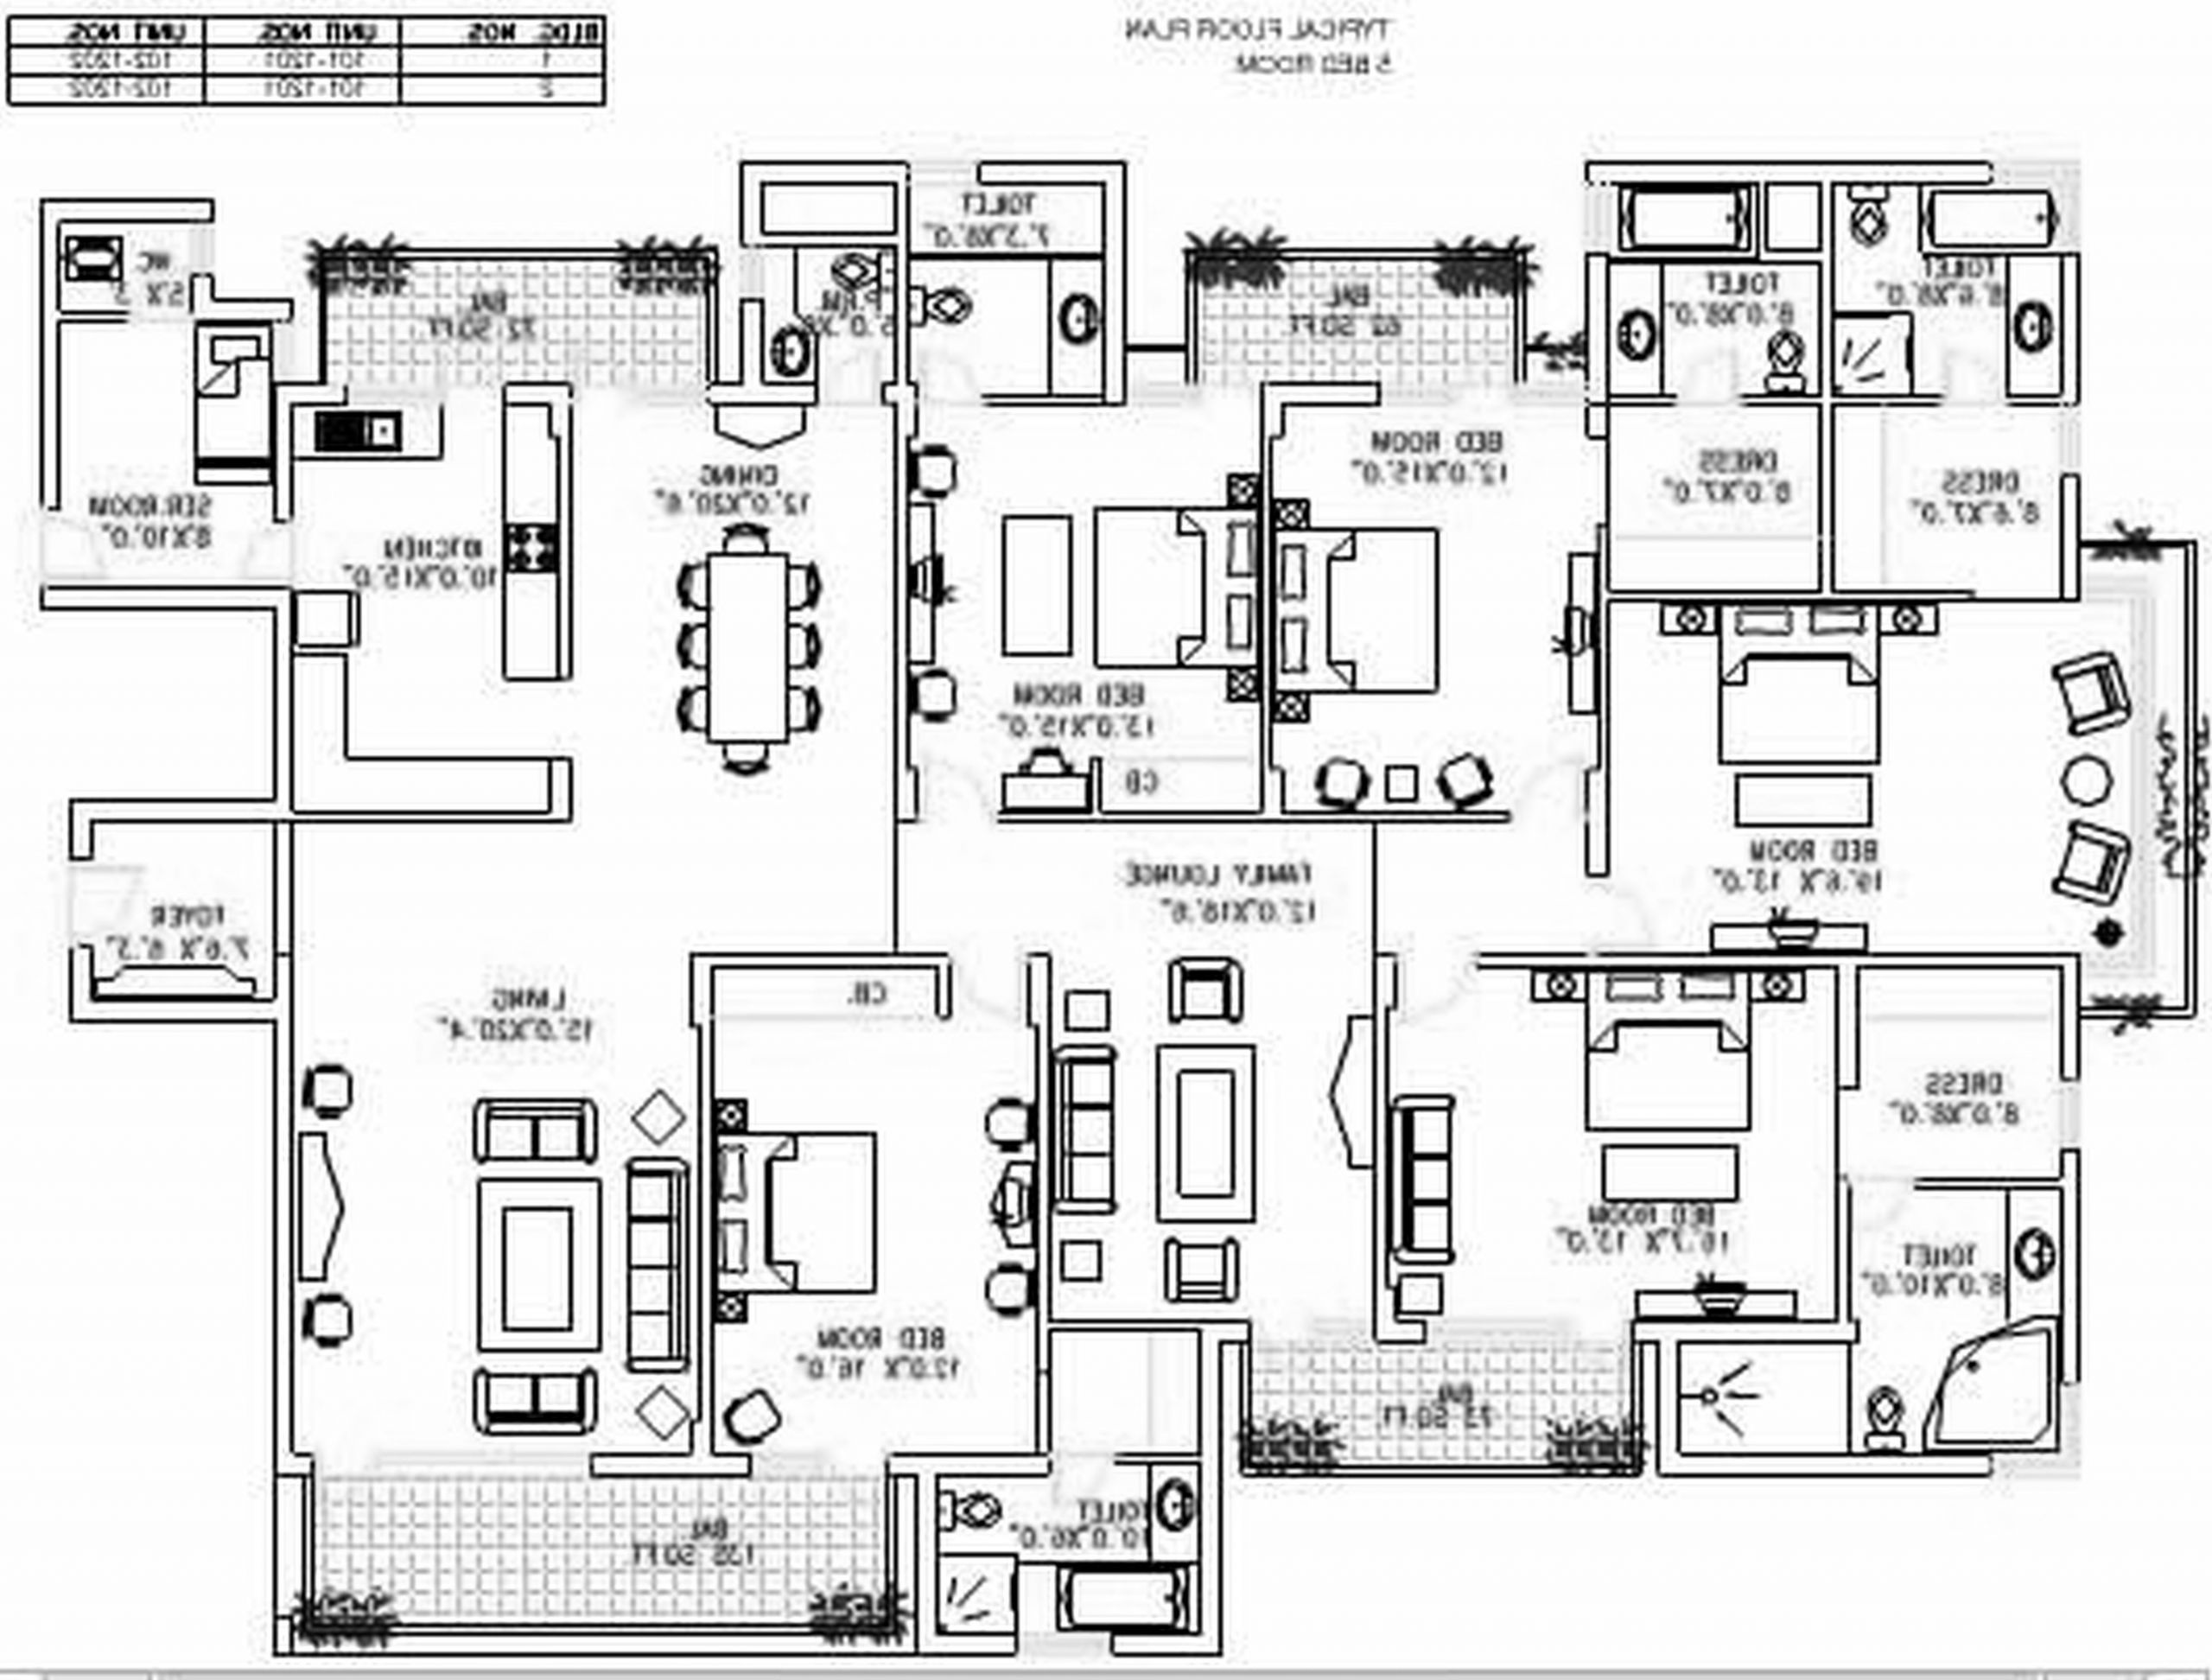 5 Bedroom Modern House Plans
 5 Bedroom House Plans BIGArchitects Pinned by